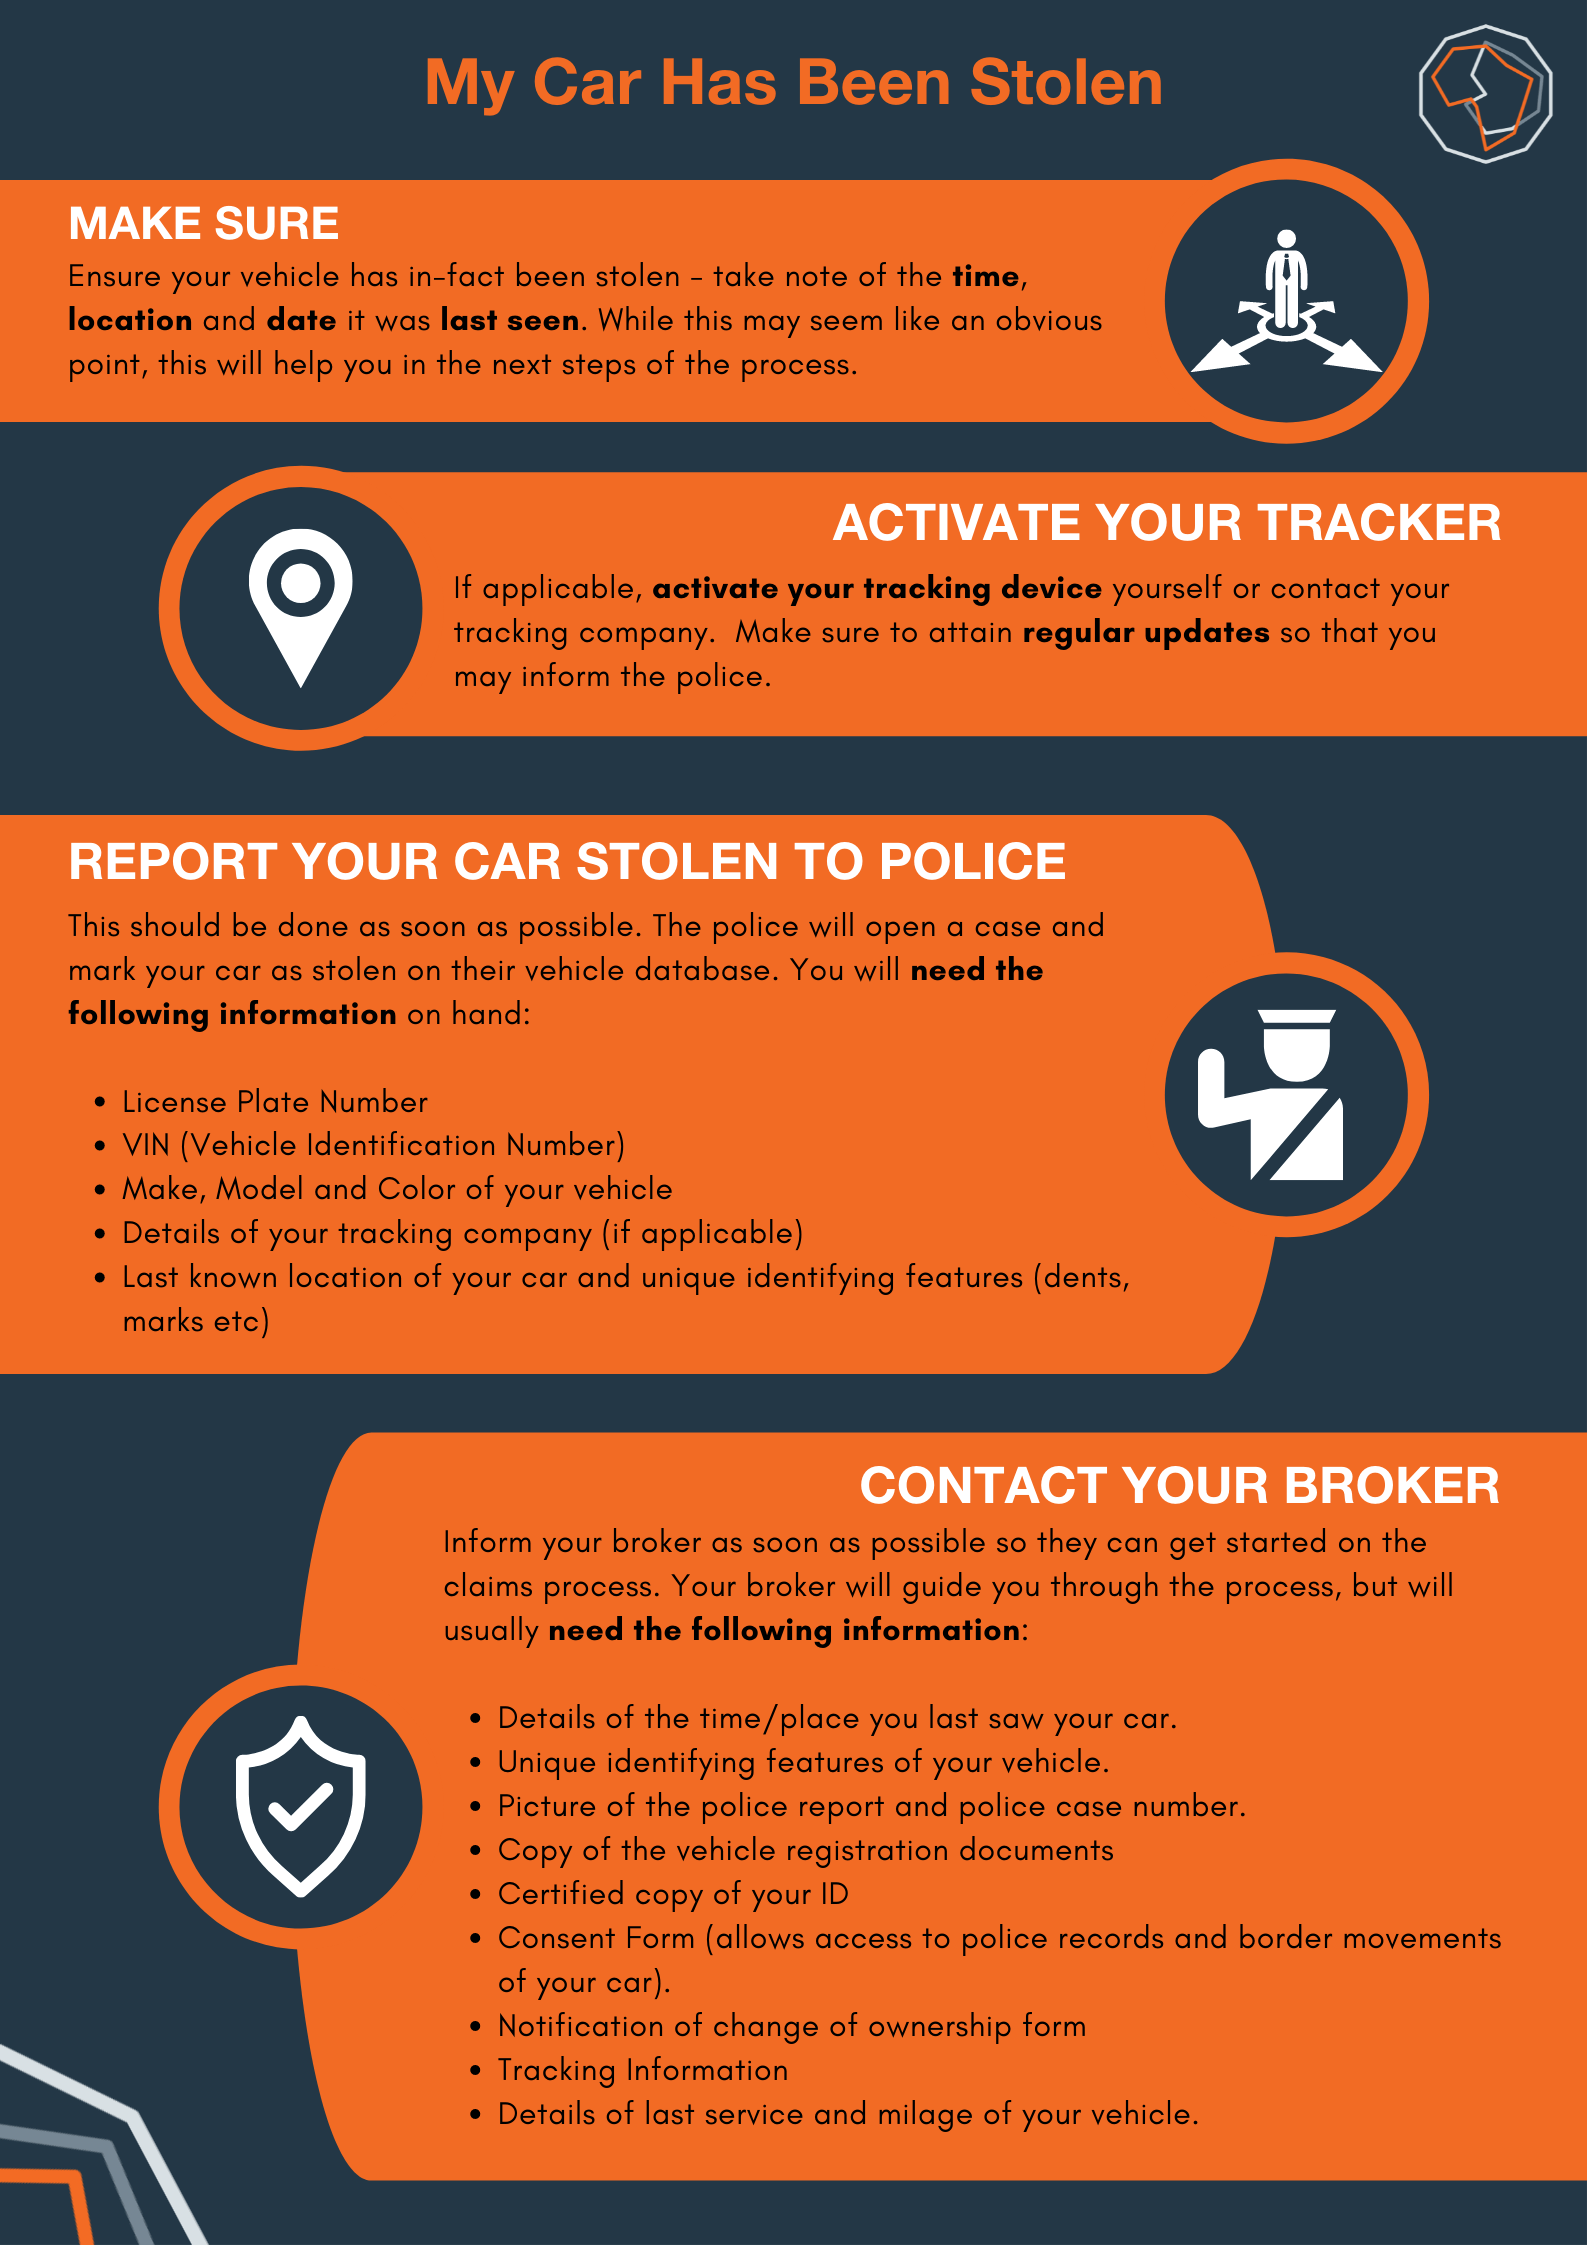 What should you do when your vehicle has been stolen